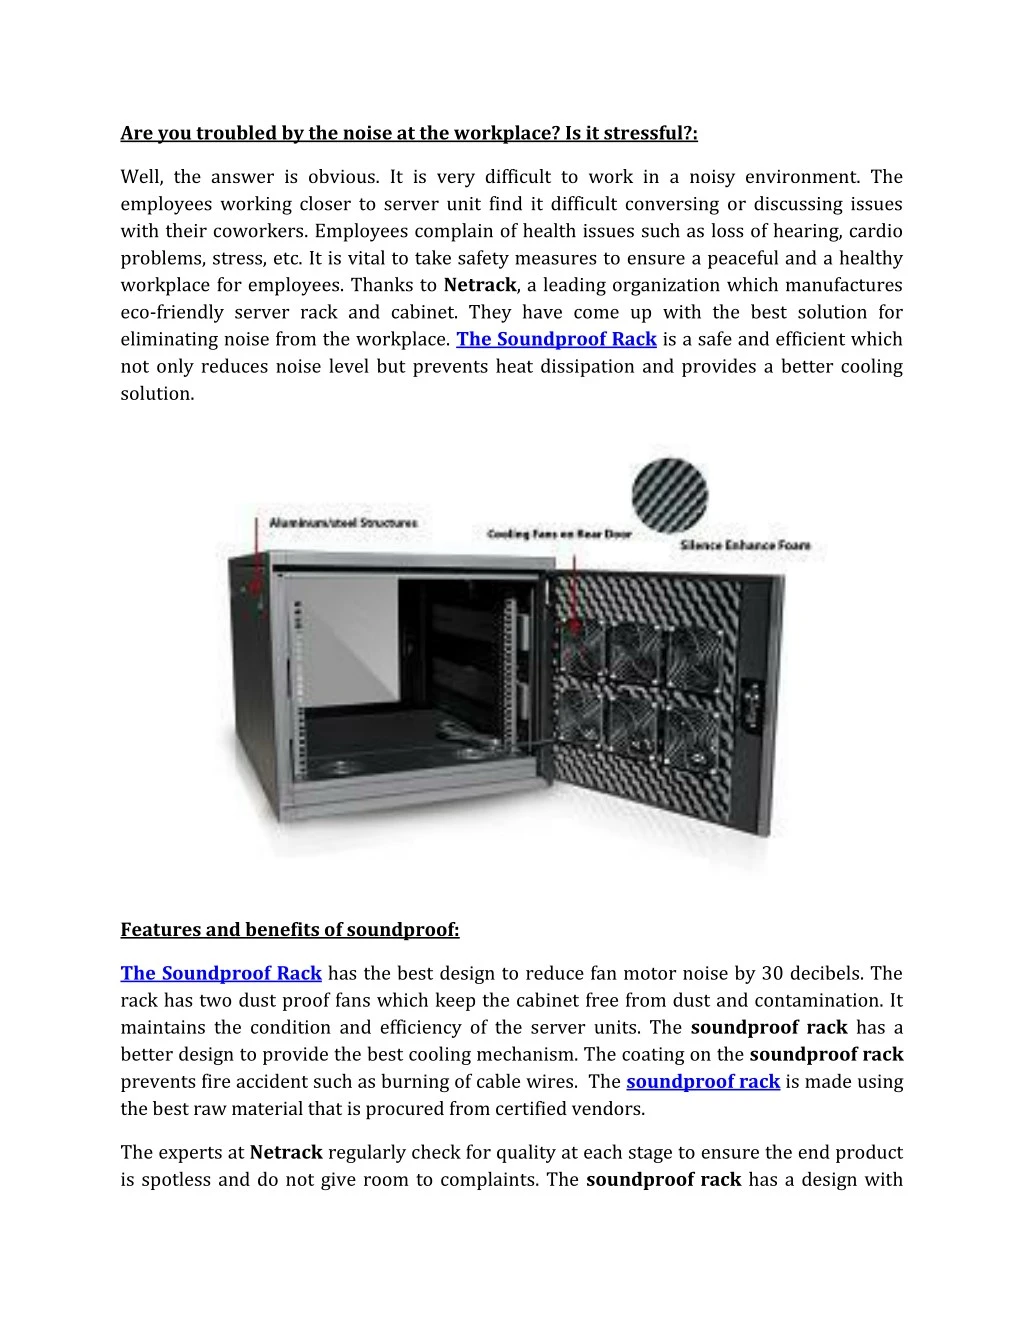 Ppt Soundproof Rack In Netrackindia Powerpoint Presentation